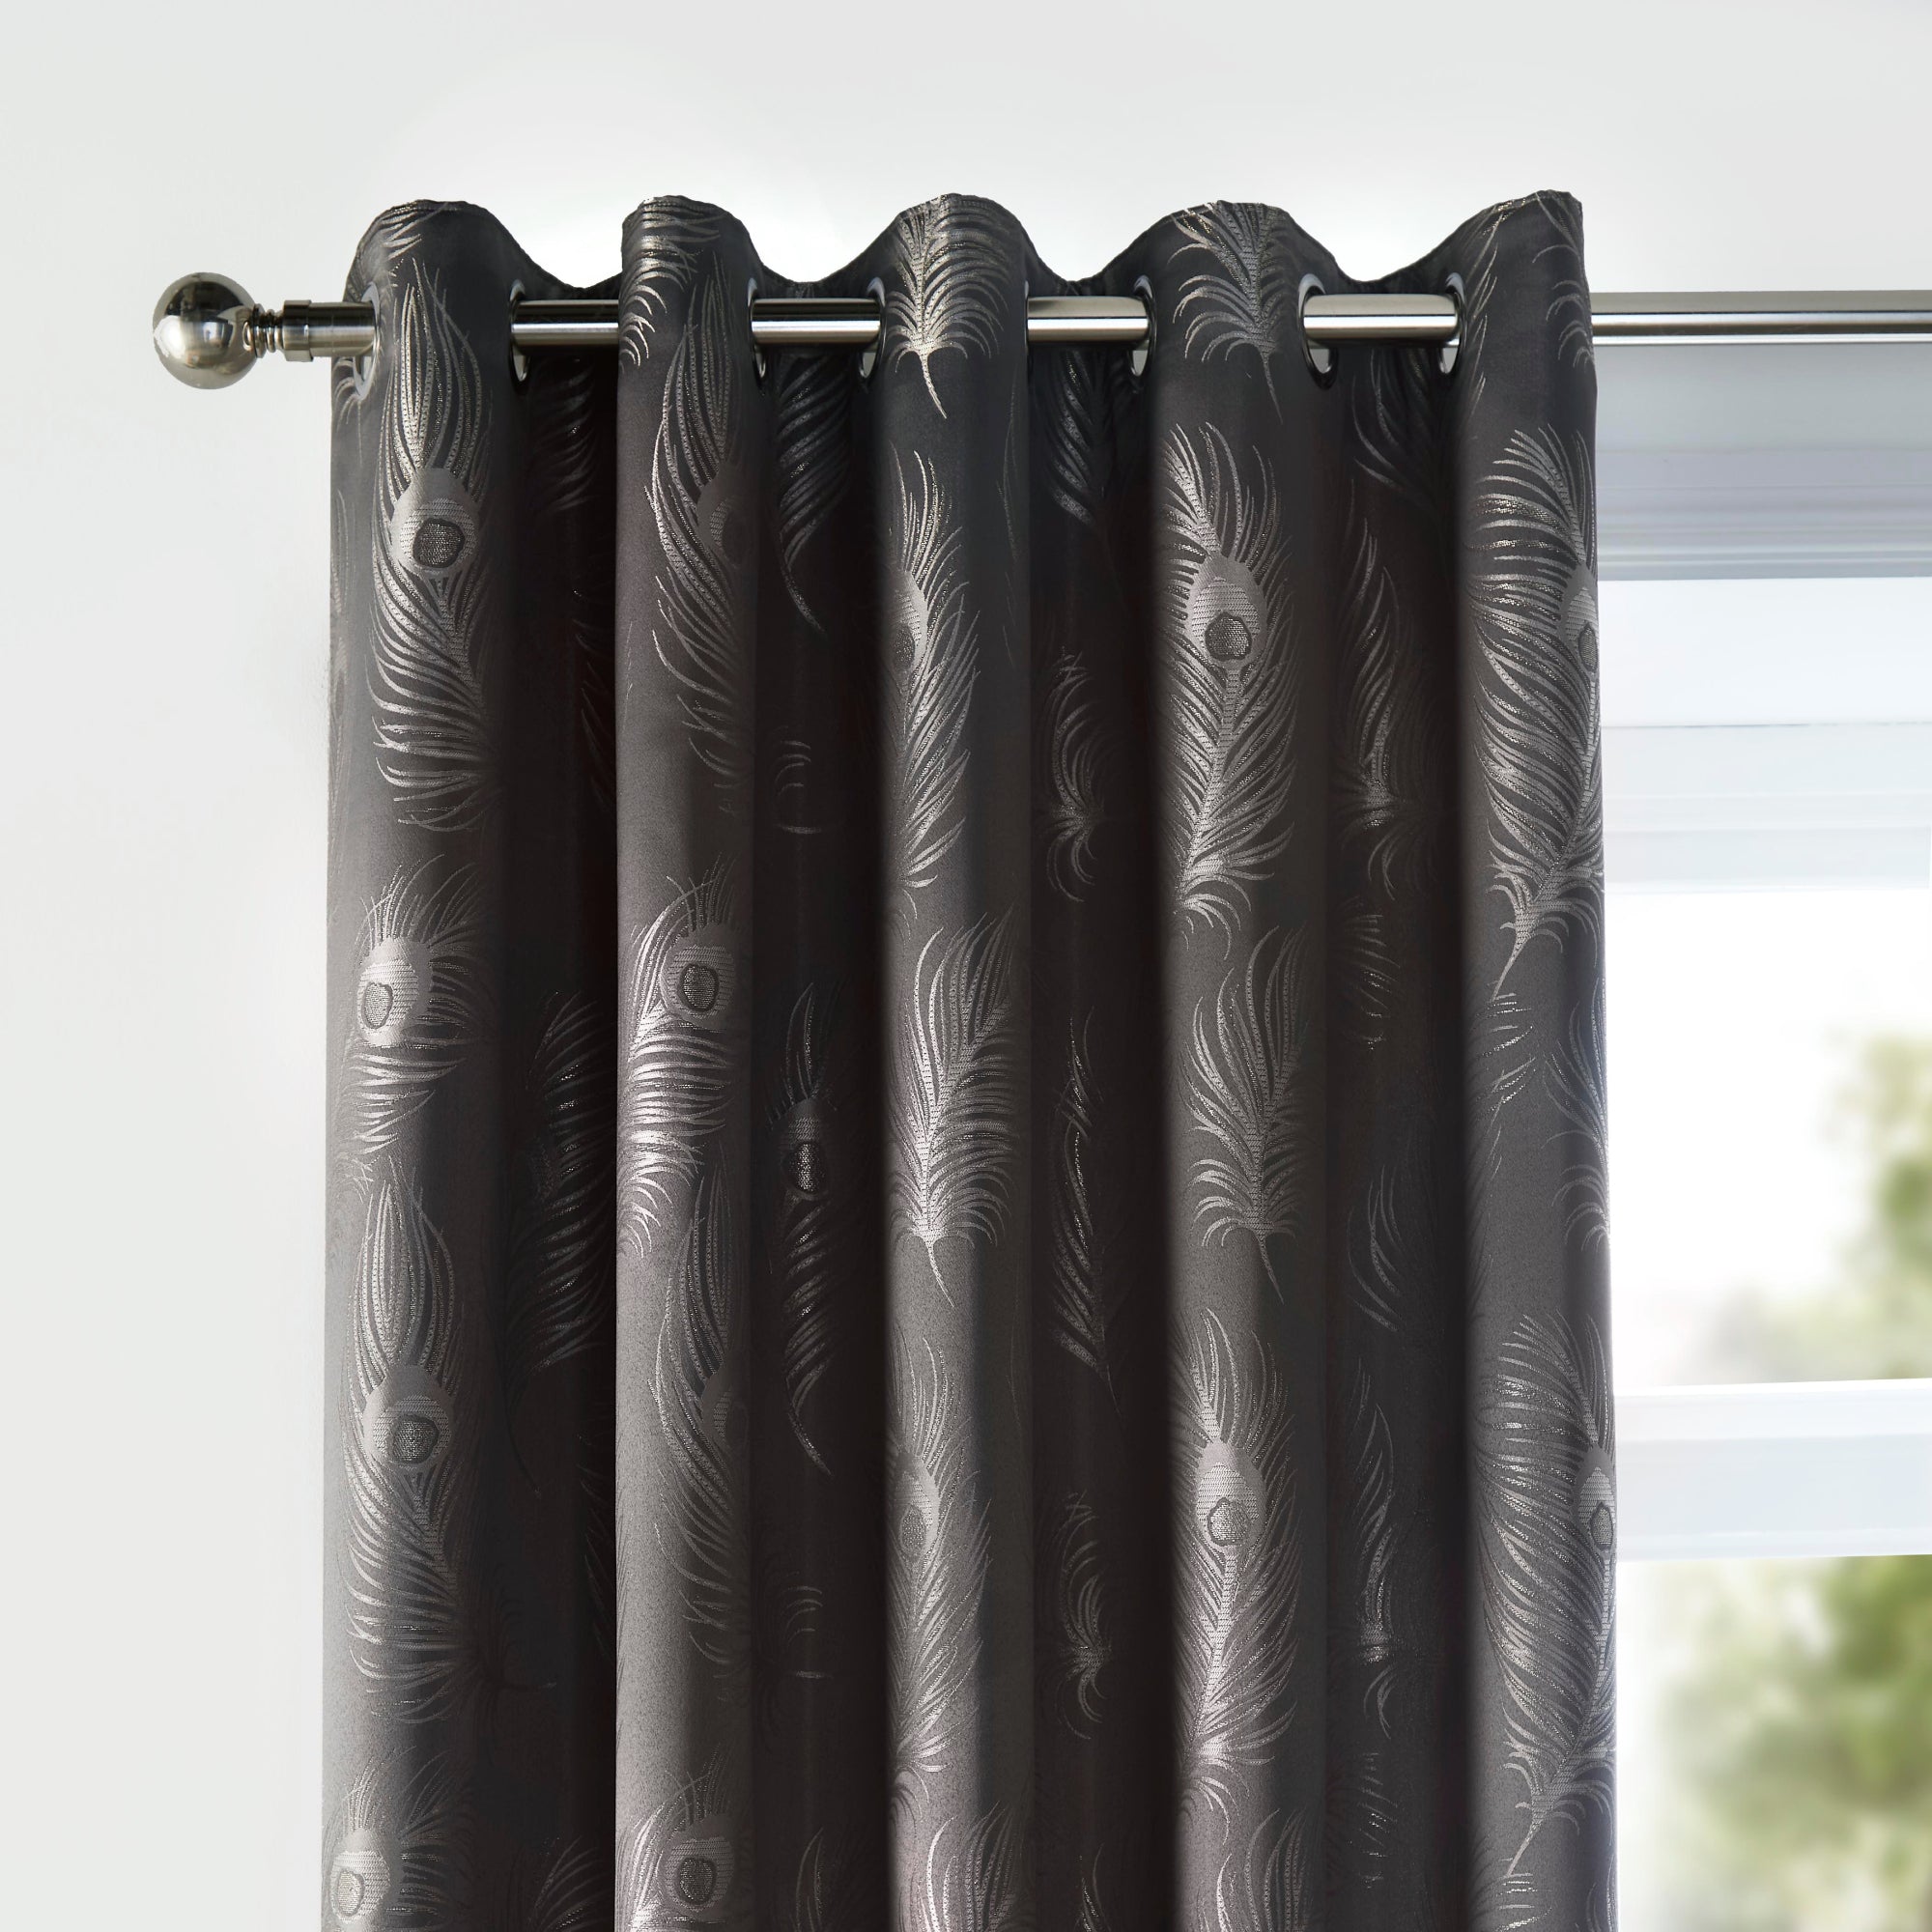 Pair of Eyelet Curtains Feather by Curtina in Slate